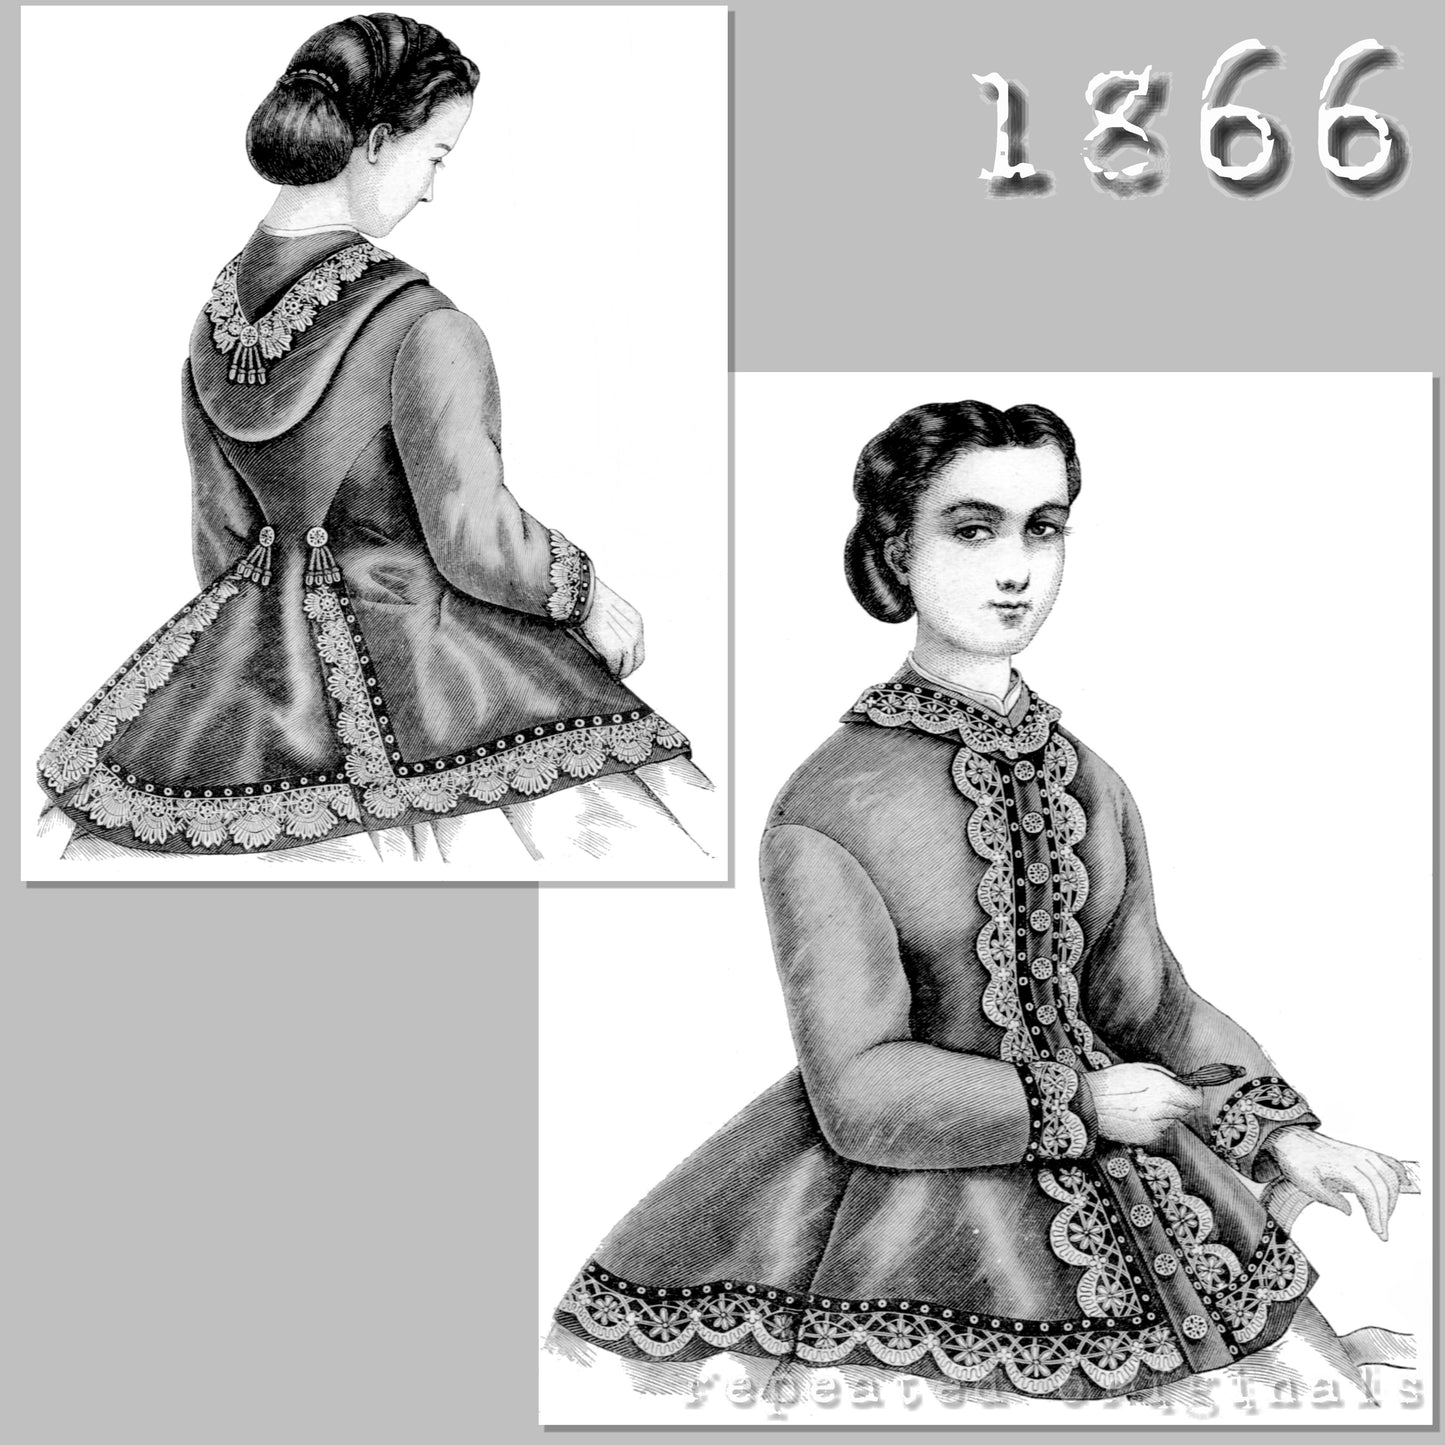 1866 Spring Coat / Pardessus Sewing Pattern - INSTANT DOWNLOAD PDF